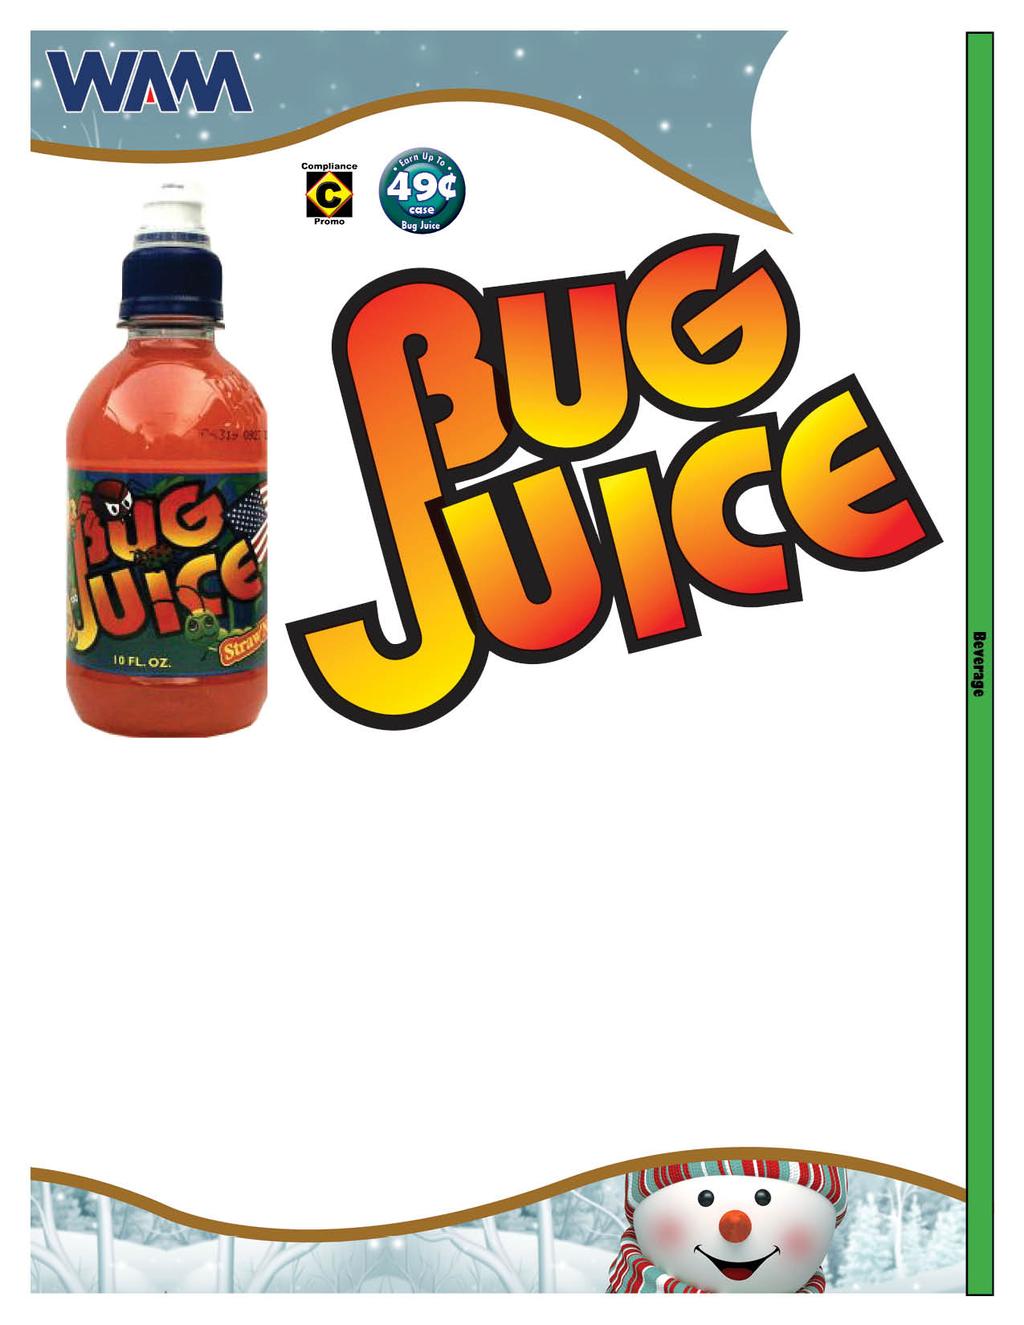 42.2% Delivery Date: Buy Now Bug Juice 10oz 361843 24 Berry Raspberry #31105 $15.23 $1.50 $13.73 $0.99 42.2% 361840 24 Fruity Punch #31101 $15.23 $1.50 $13.73 $0.99 42.2% 361847 24 Grapey Grape #31102 $15.